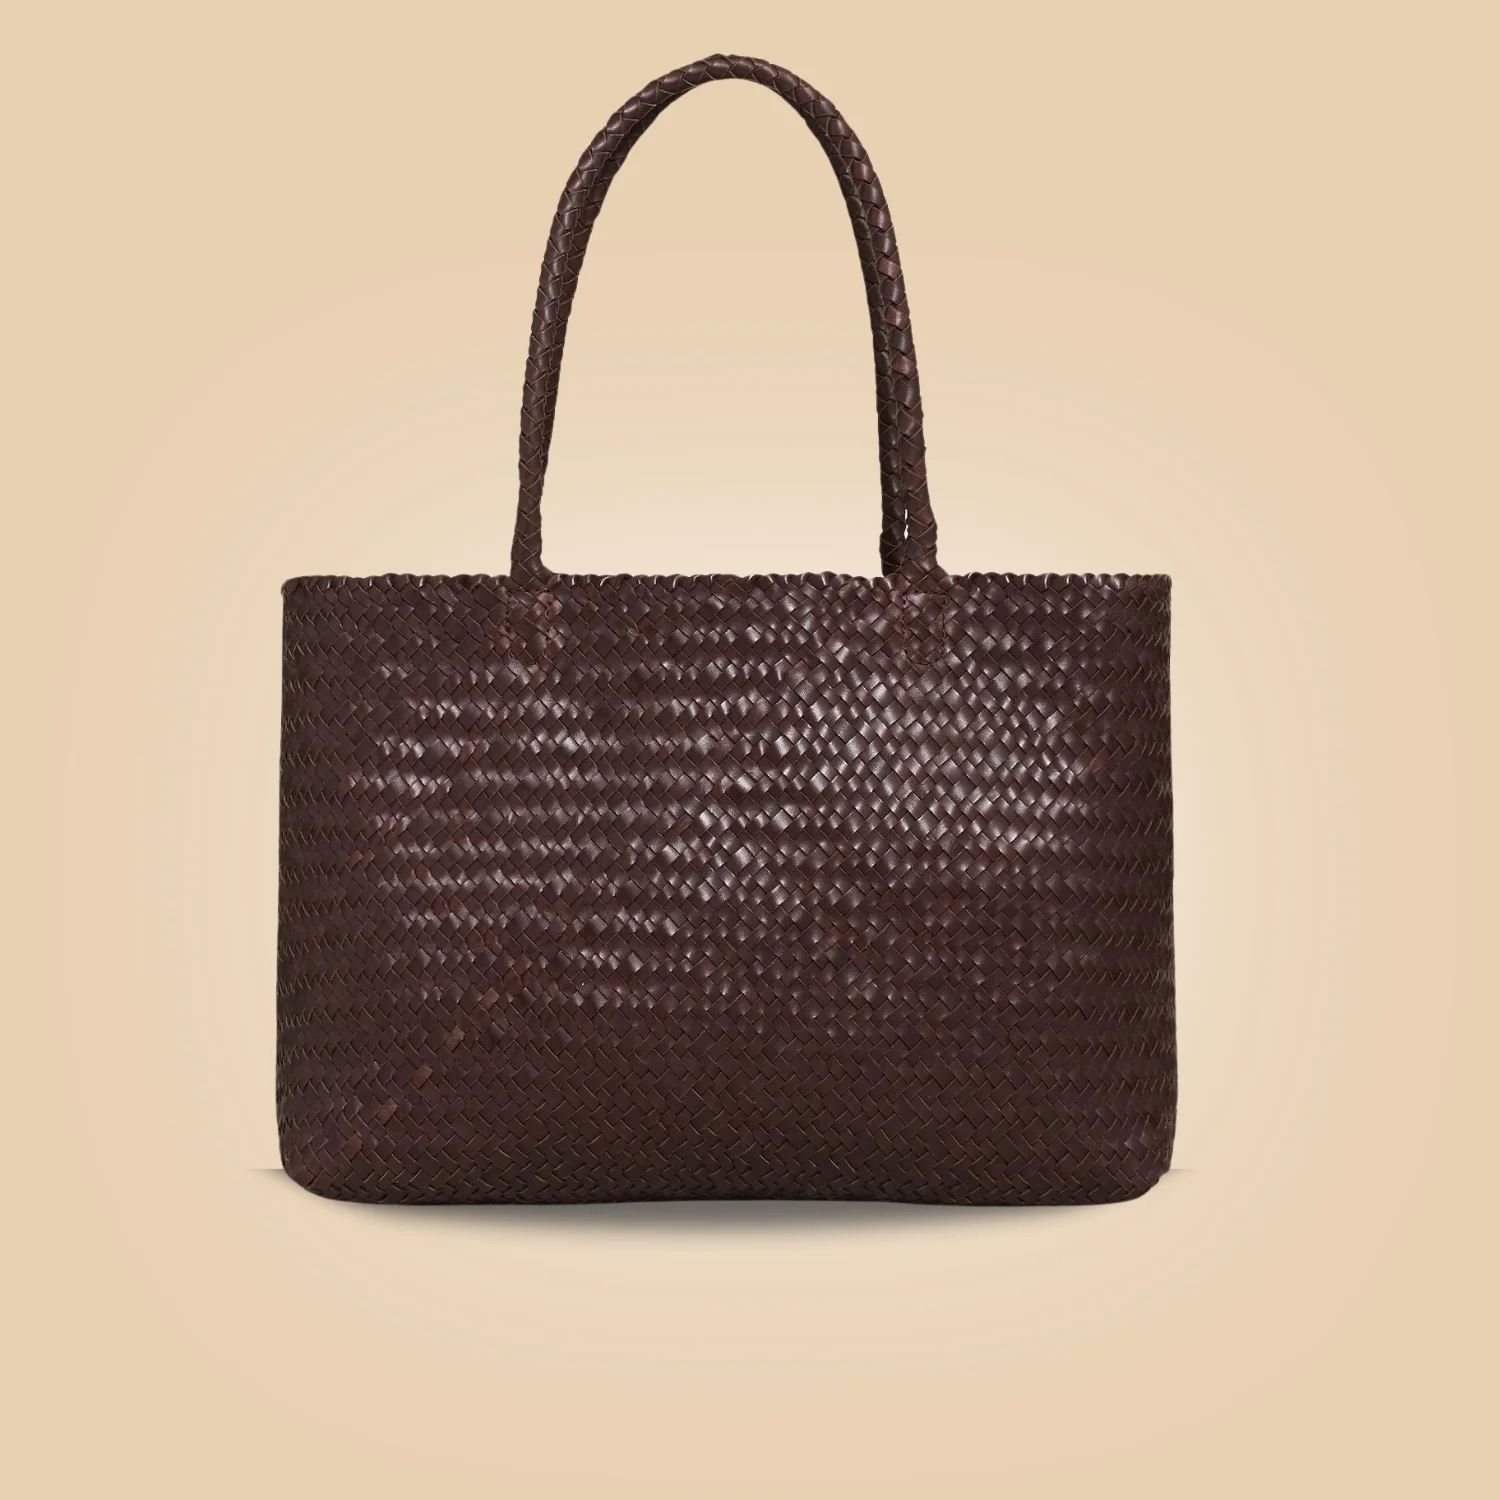 Buy Classy Dark Brown Leather Woven Tote Bag